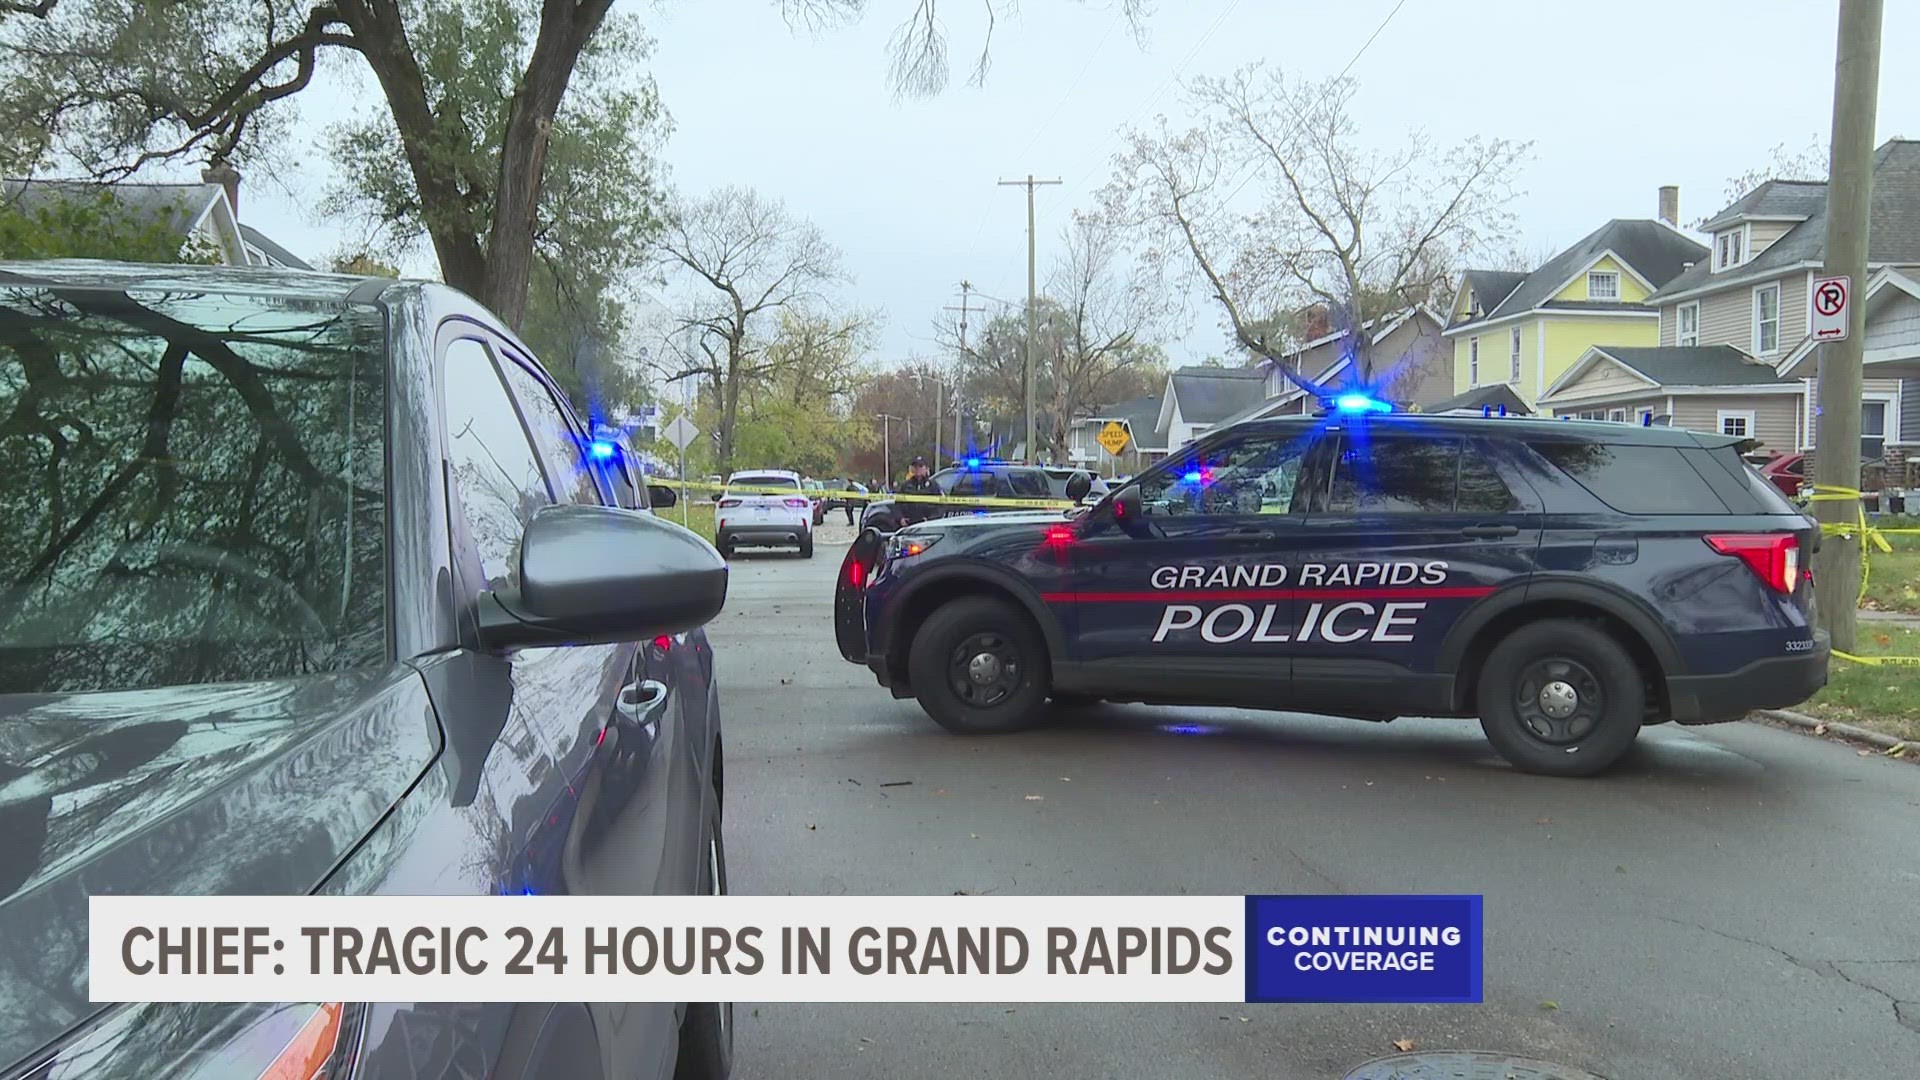 The Grand Rapids Police Chief said it has been a tragic 24 hours after multiple shootings in the community left three people dead.